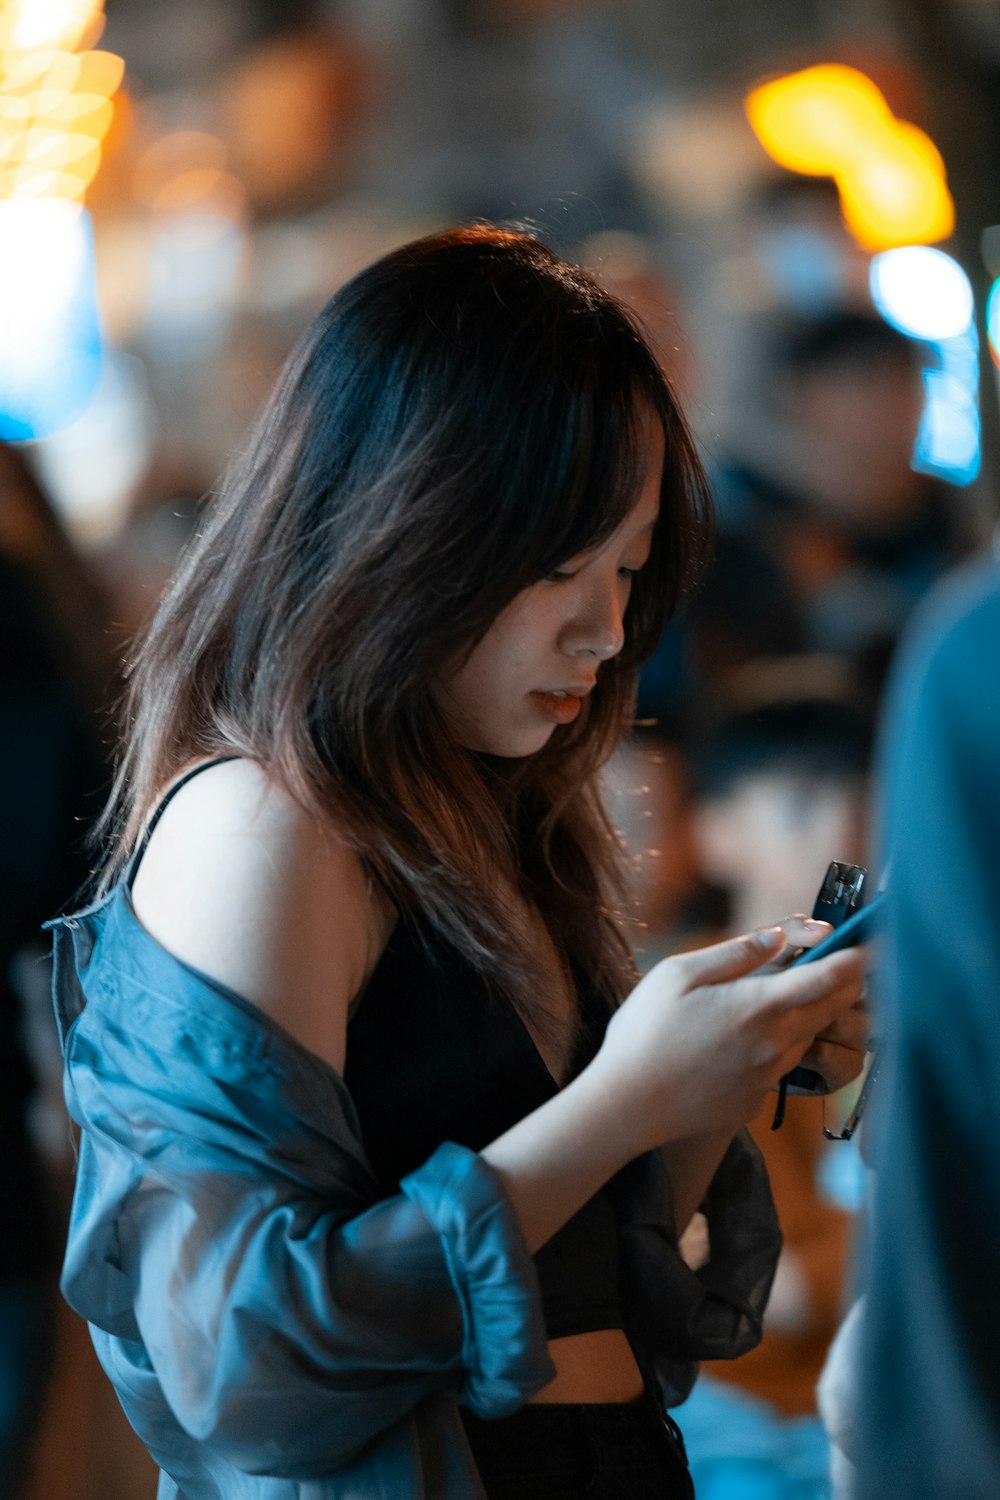 a woman in a blue top is looking at her cell phone